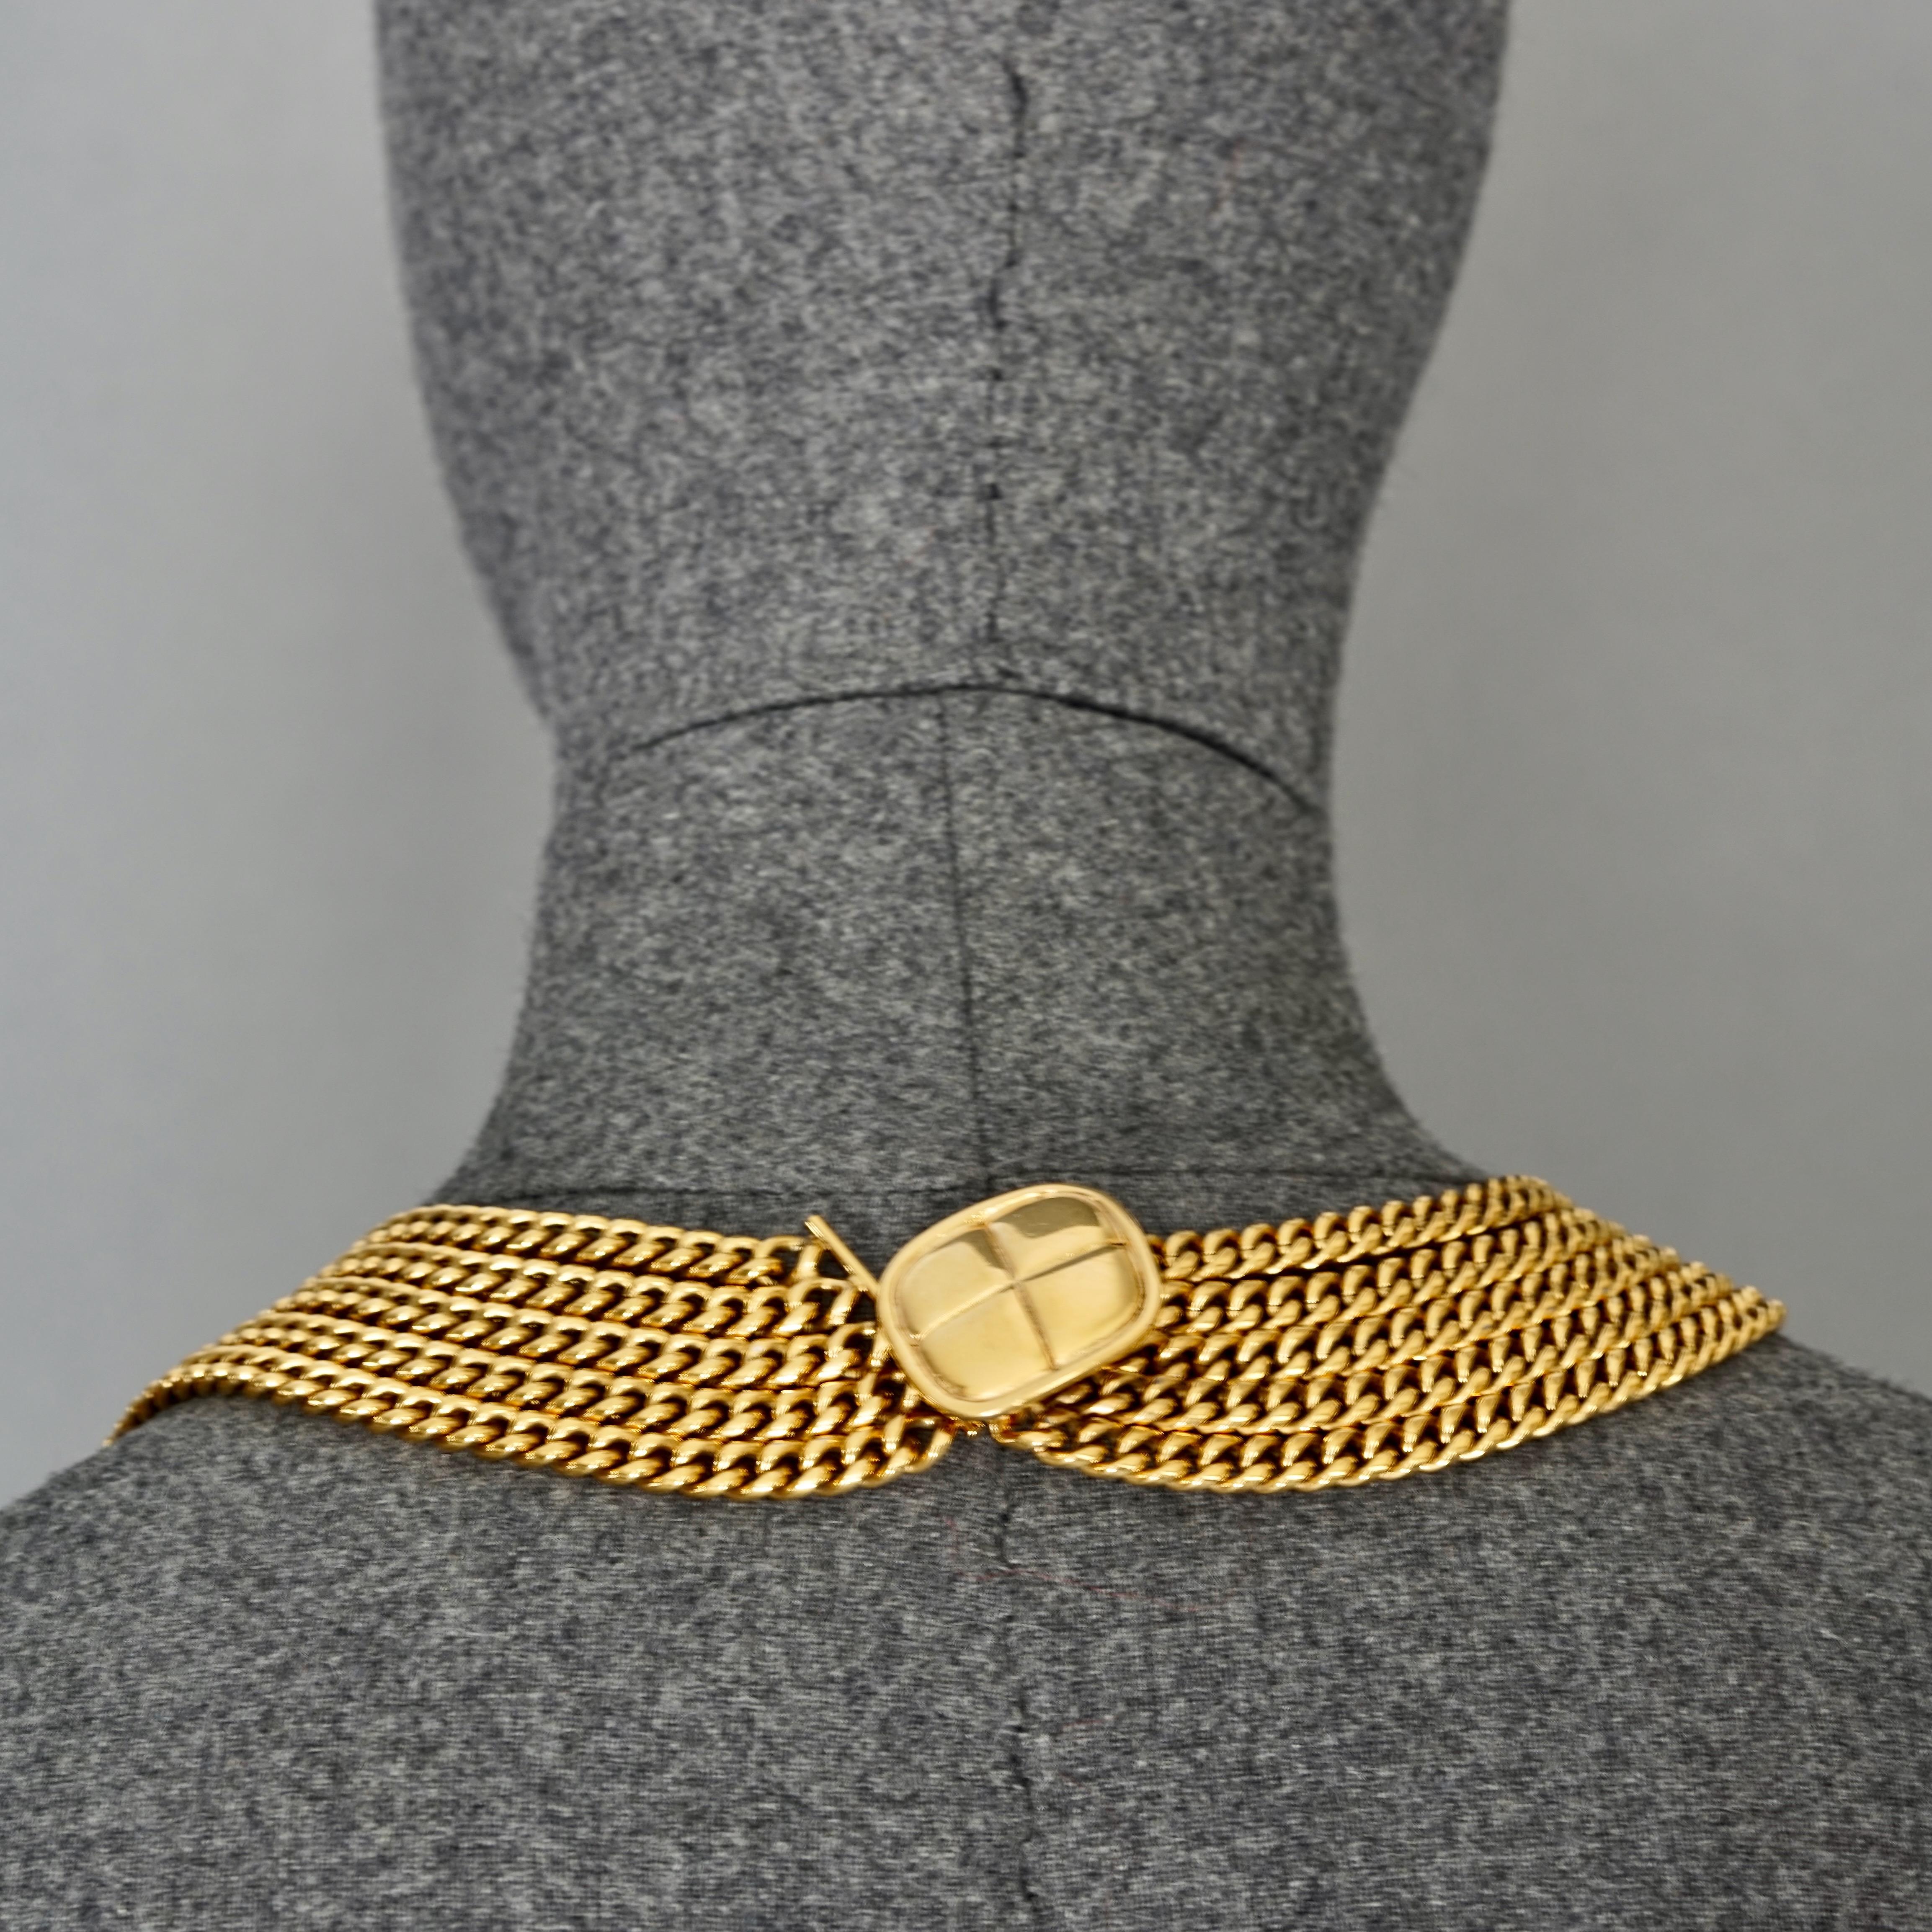 Vintage CHANEL Multi Chain Quilted Closure Necklace In Excellent Condition For Sale In Kingersheim, Alsace